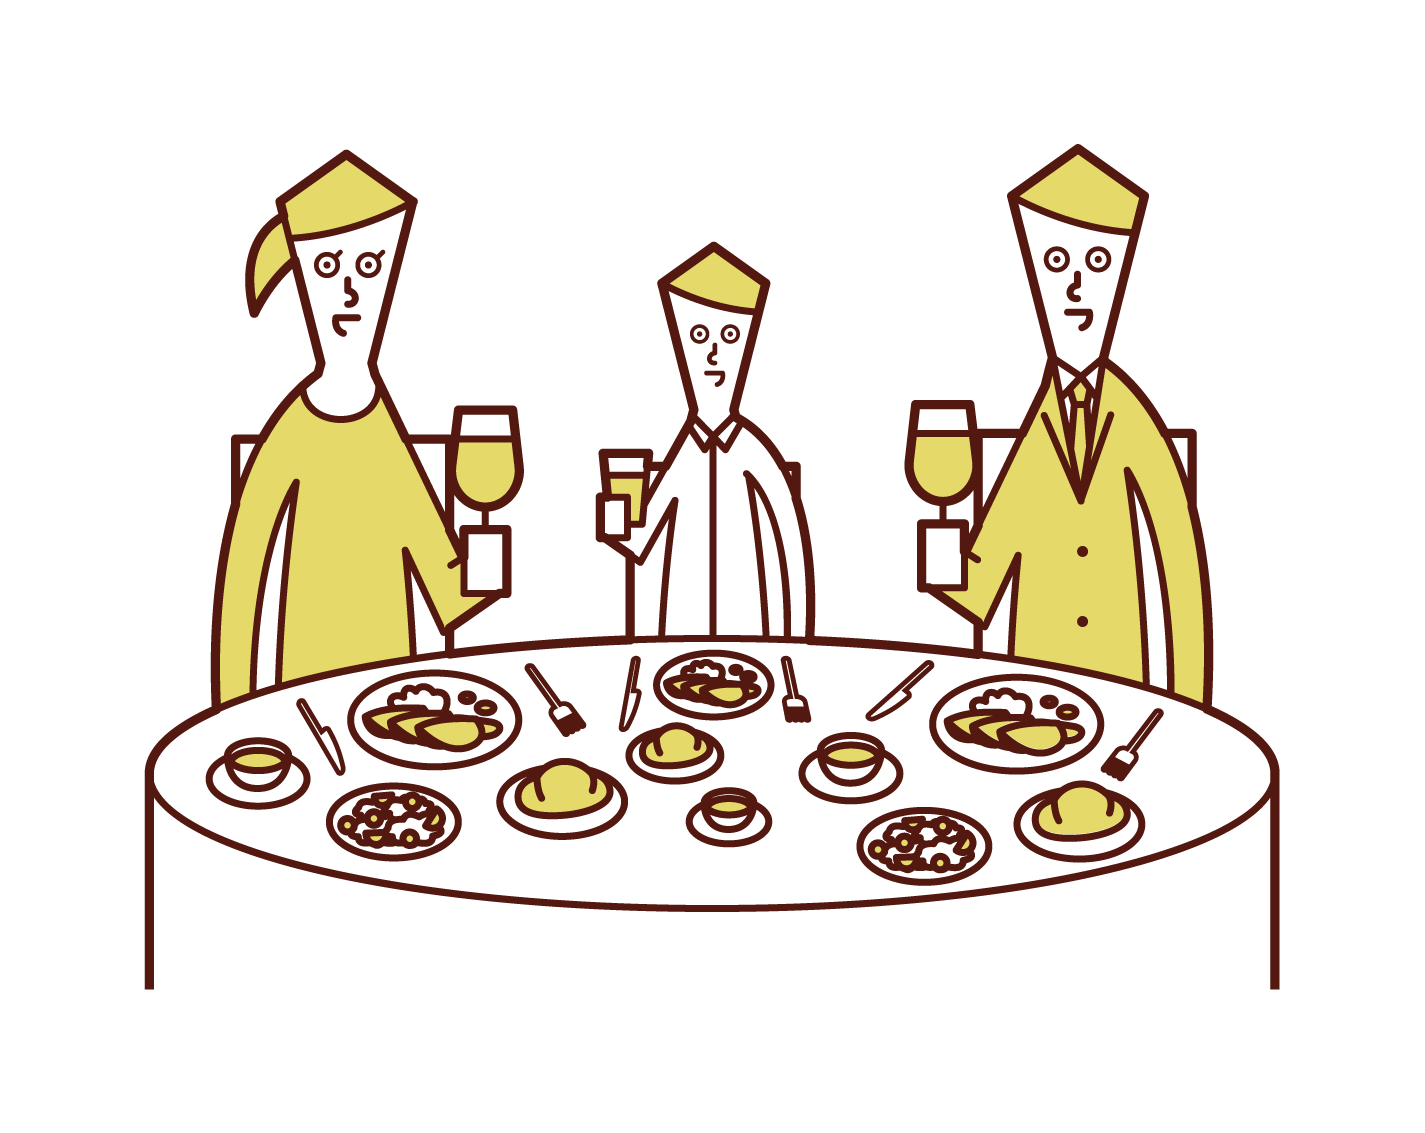 Illustration of a family enjoying a meal at a restaurant